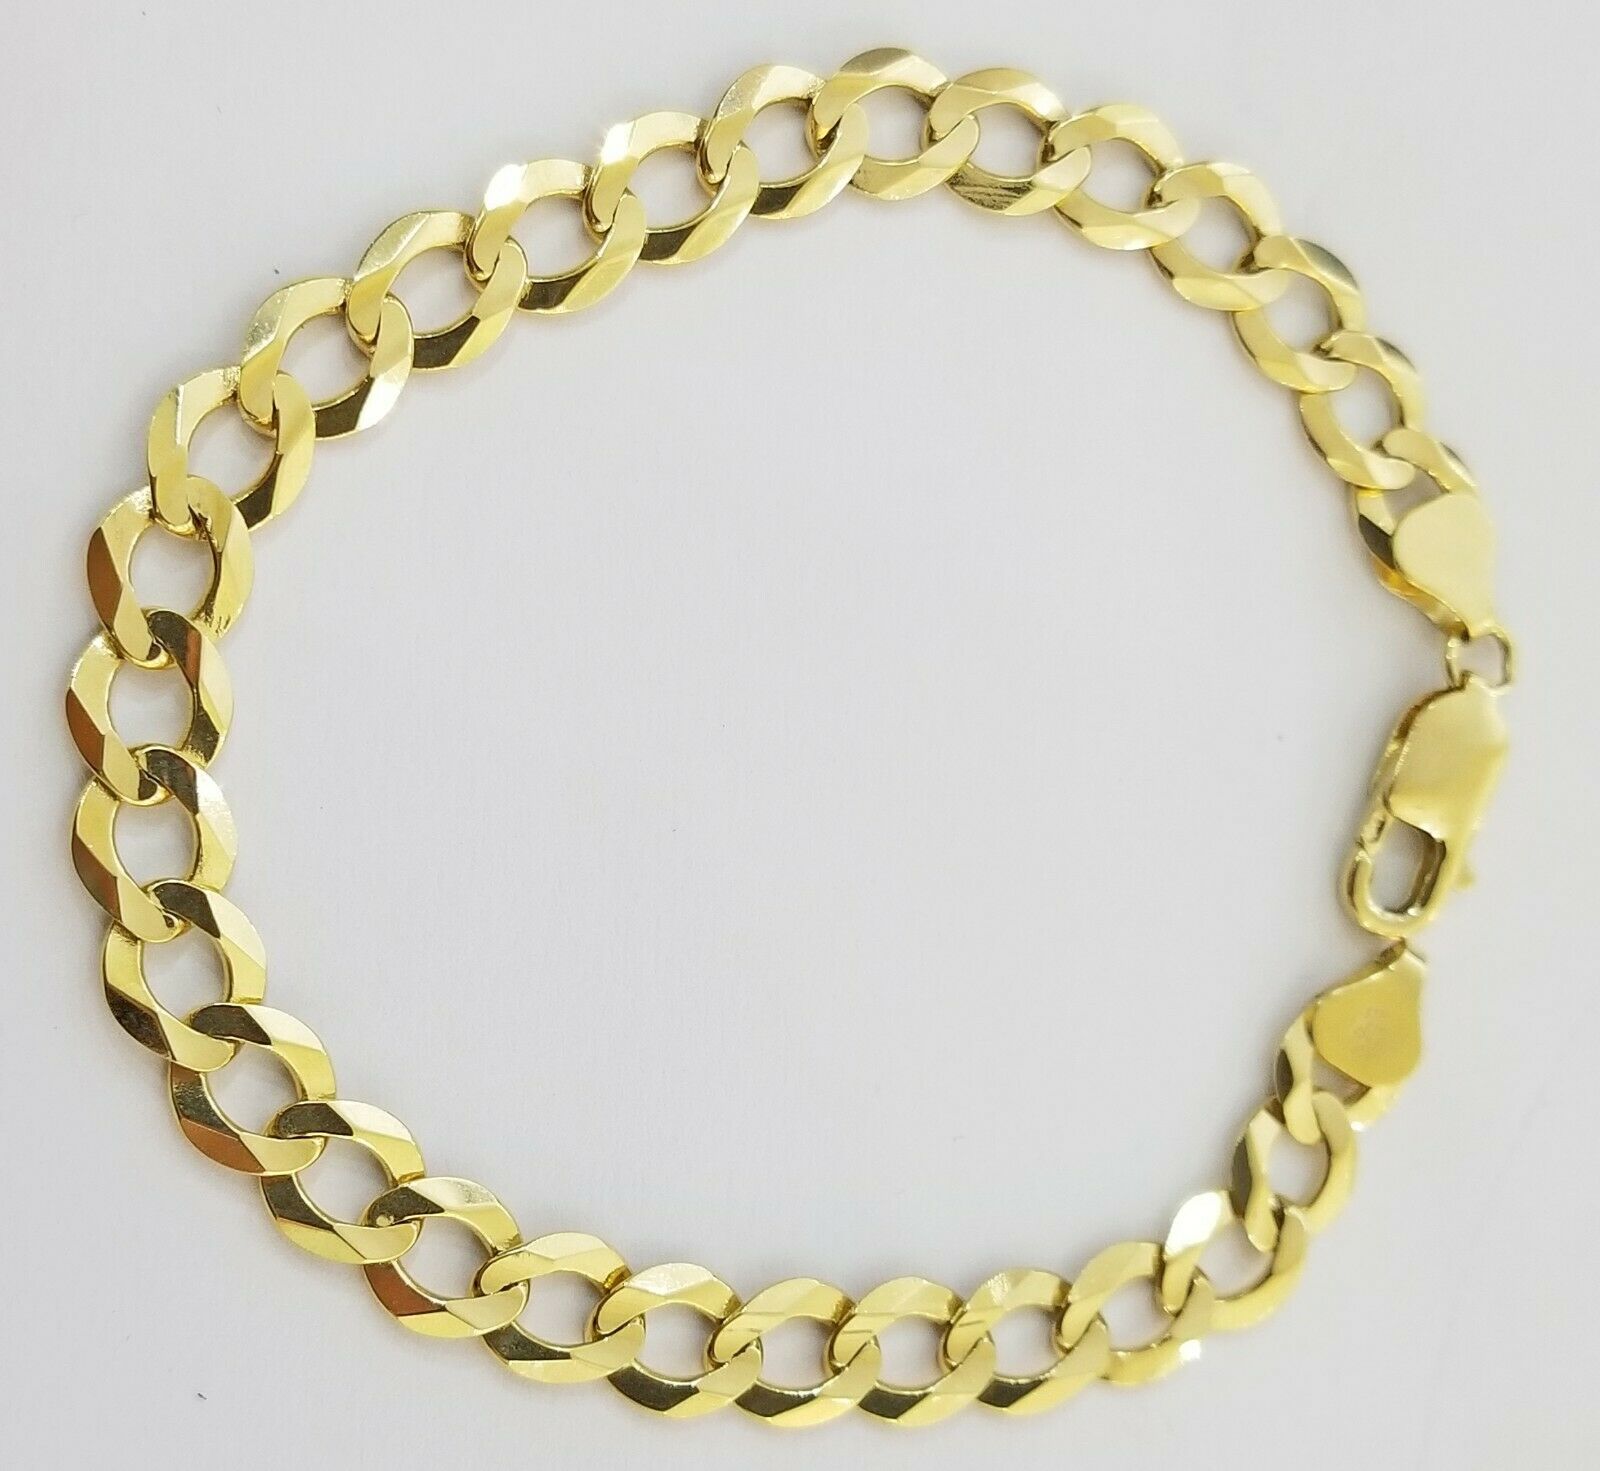 14kt yellow gold lobster clasp chain — The Gold Source Jewelry Store